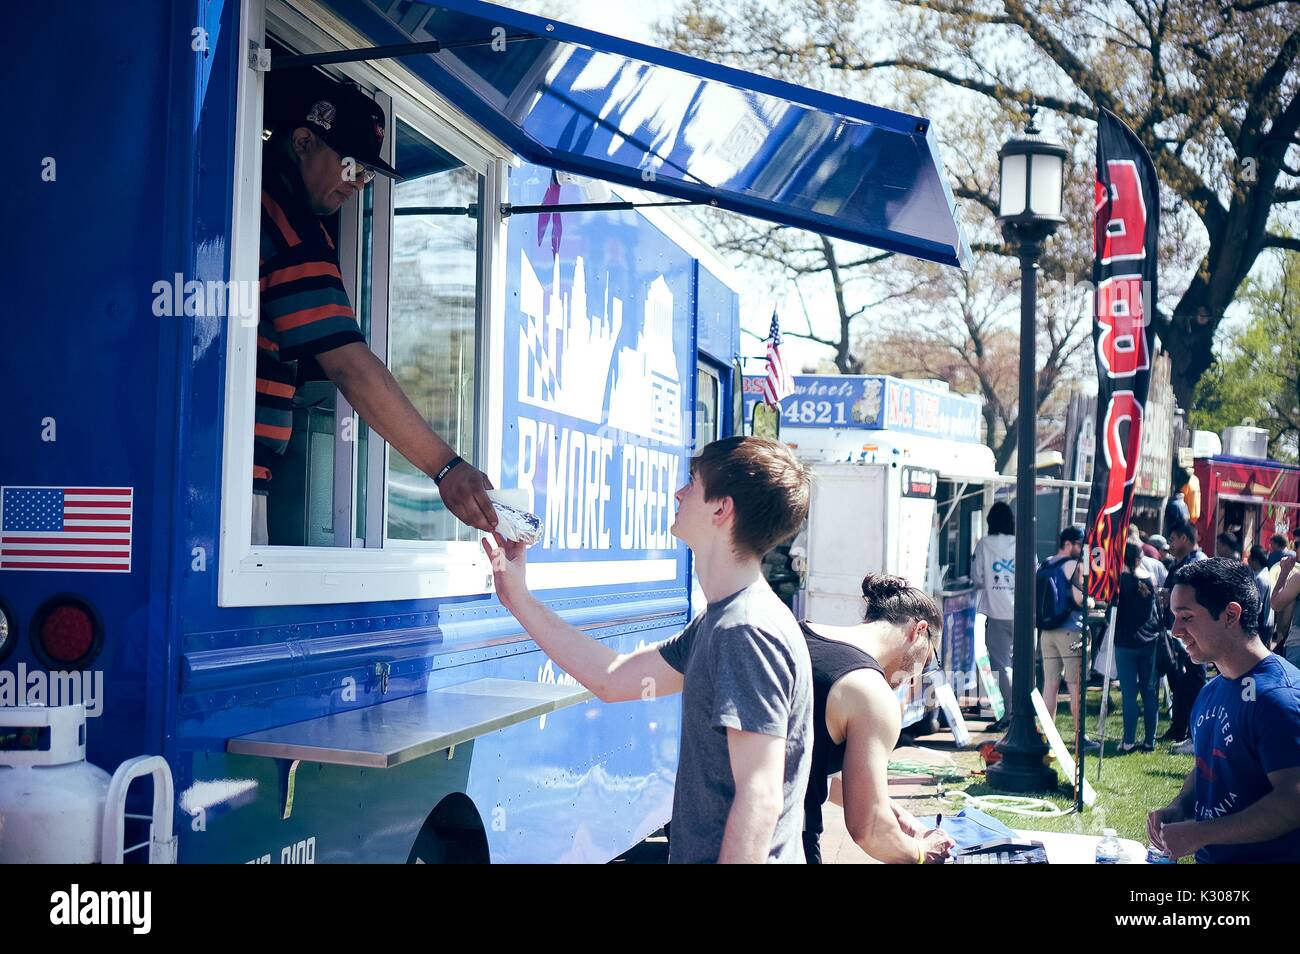 A man from inside a food truck hands a male student a sandwich wrapped in foil, during Spring Fair, a student-run spring carnival at Johns Hopkins University, Baltimore, Maryland, April, 2016. Courtesy Eric Chen. Stock Photo